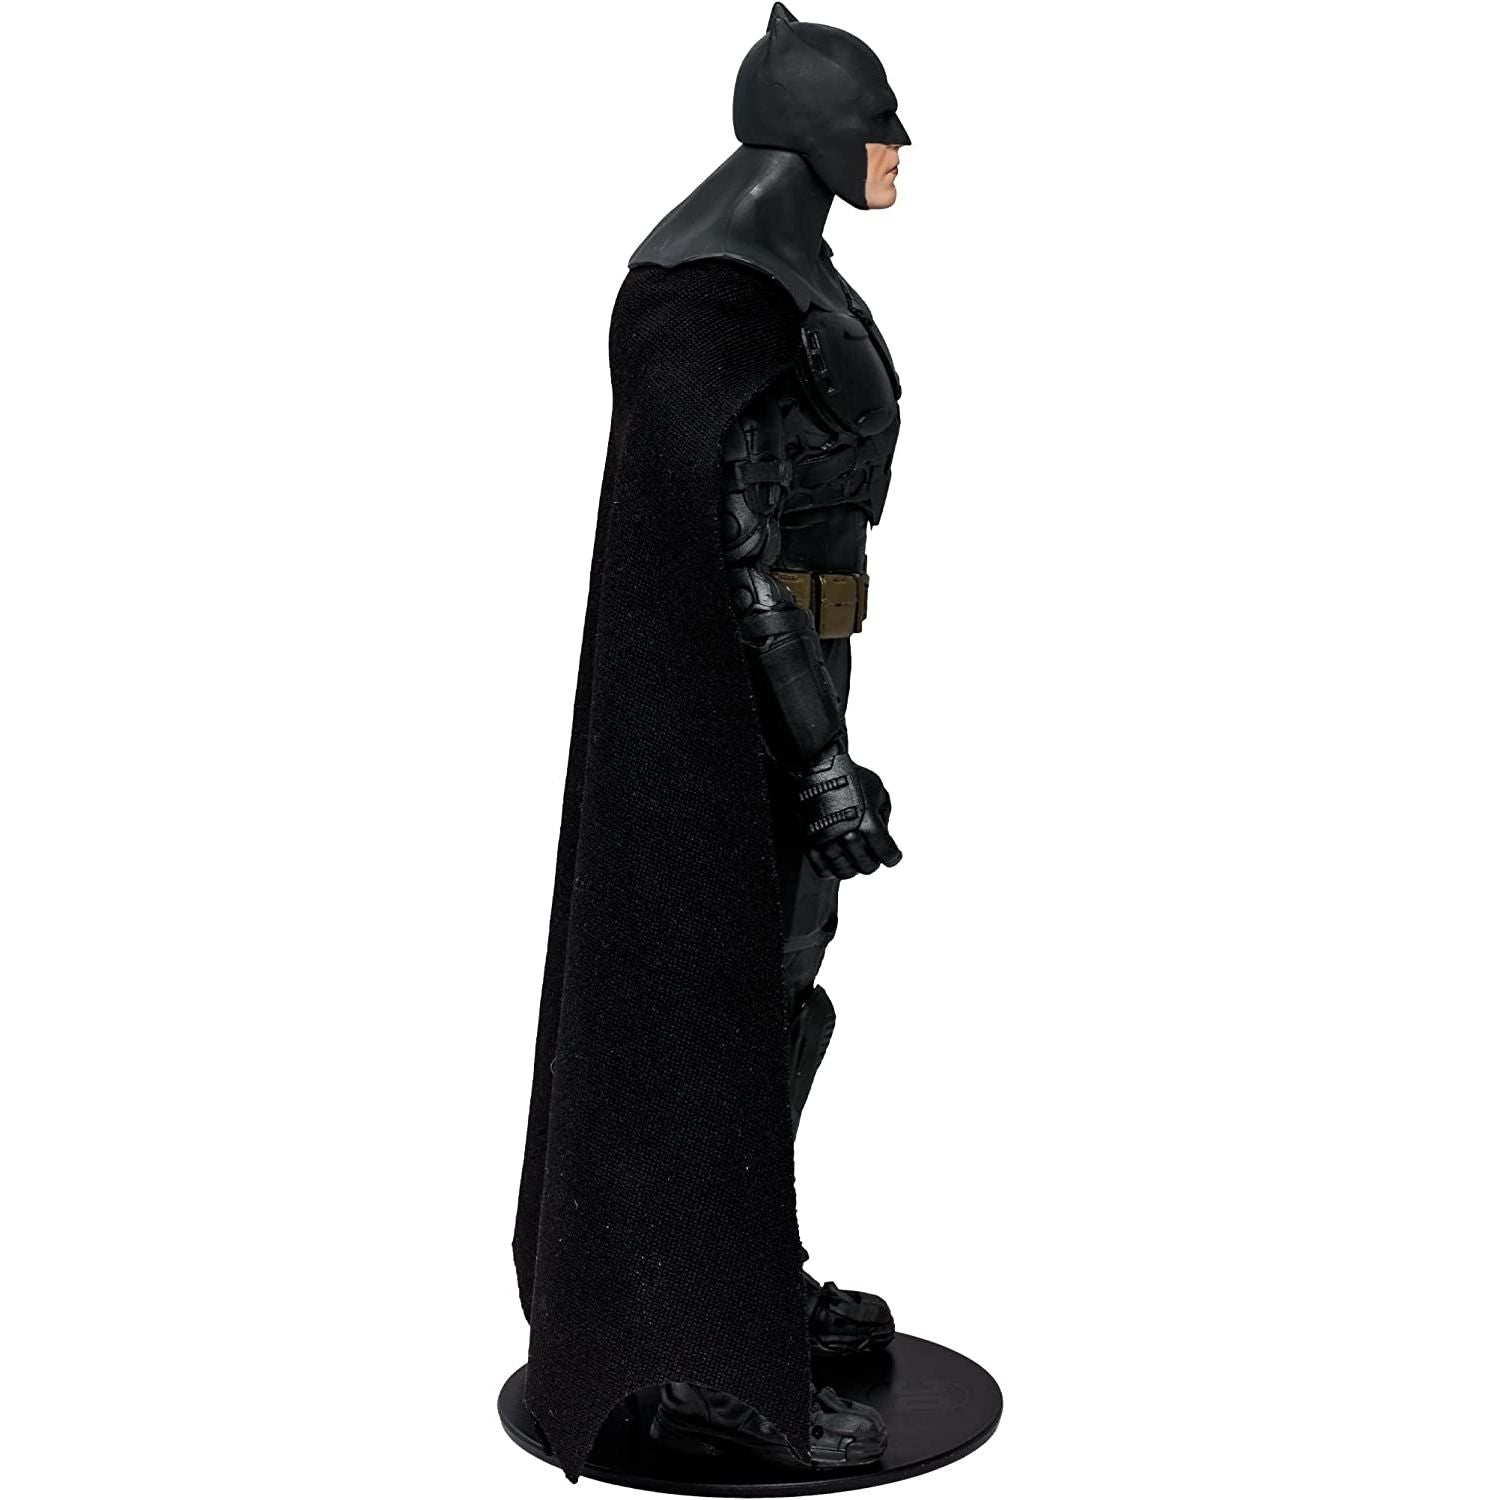 DC Multiverse - The Flash Movie - The Batman Action Figure Toy 7-INCH - Heretoserveyou